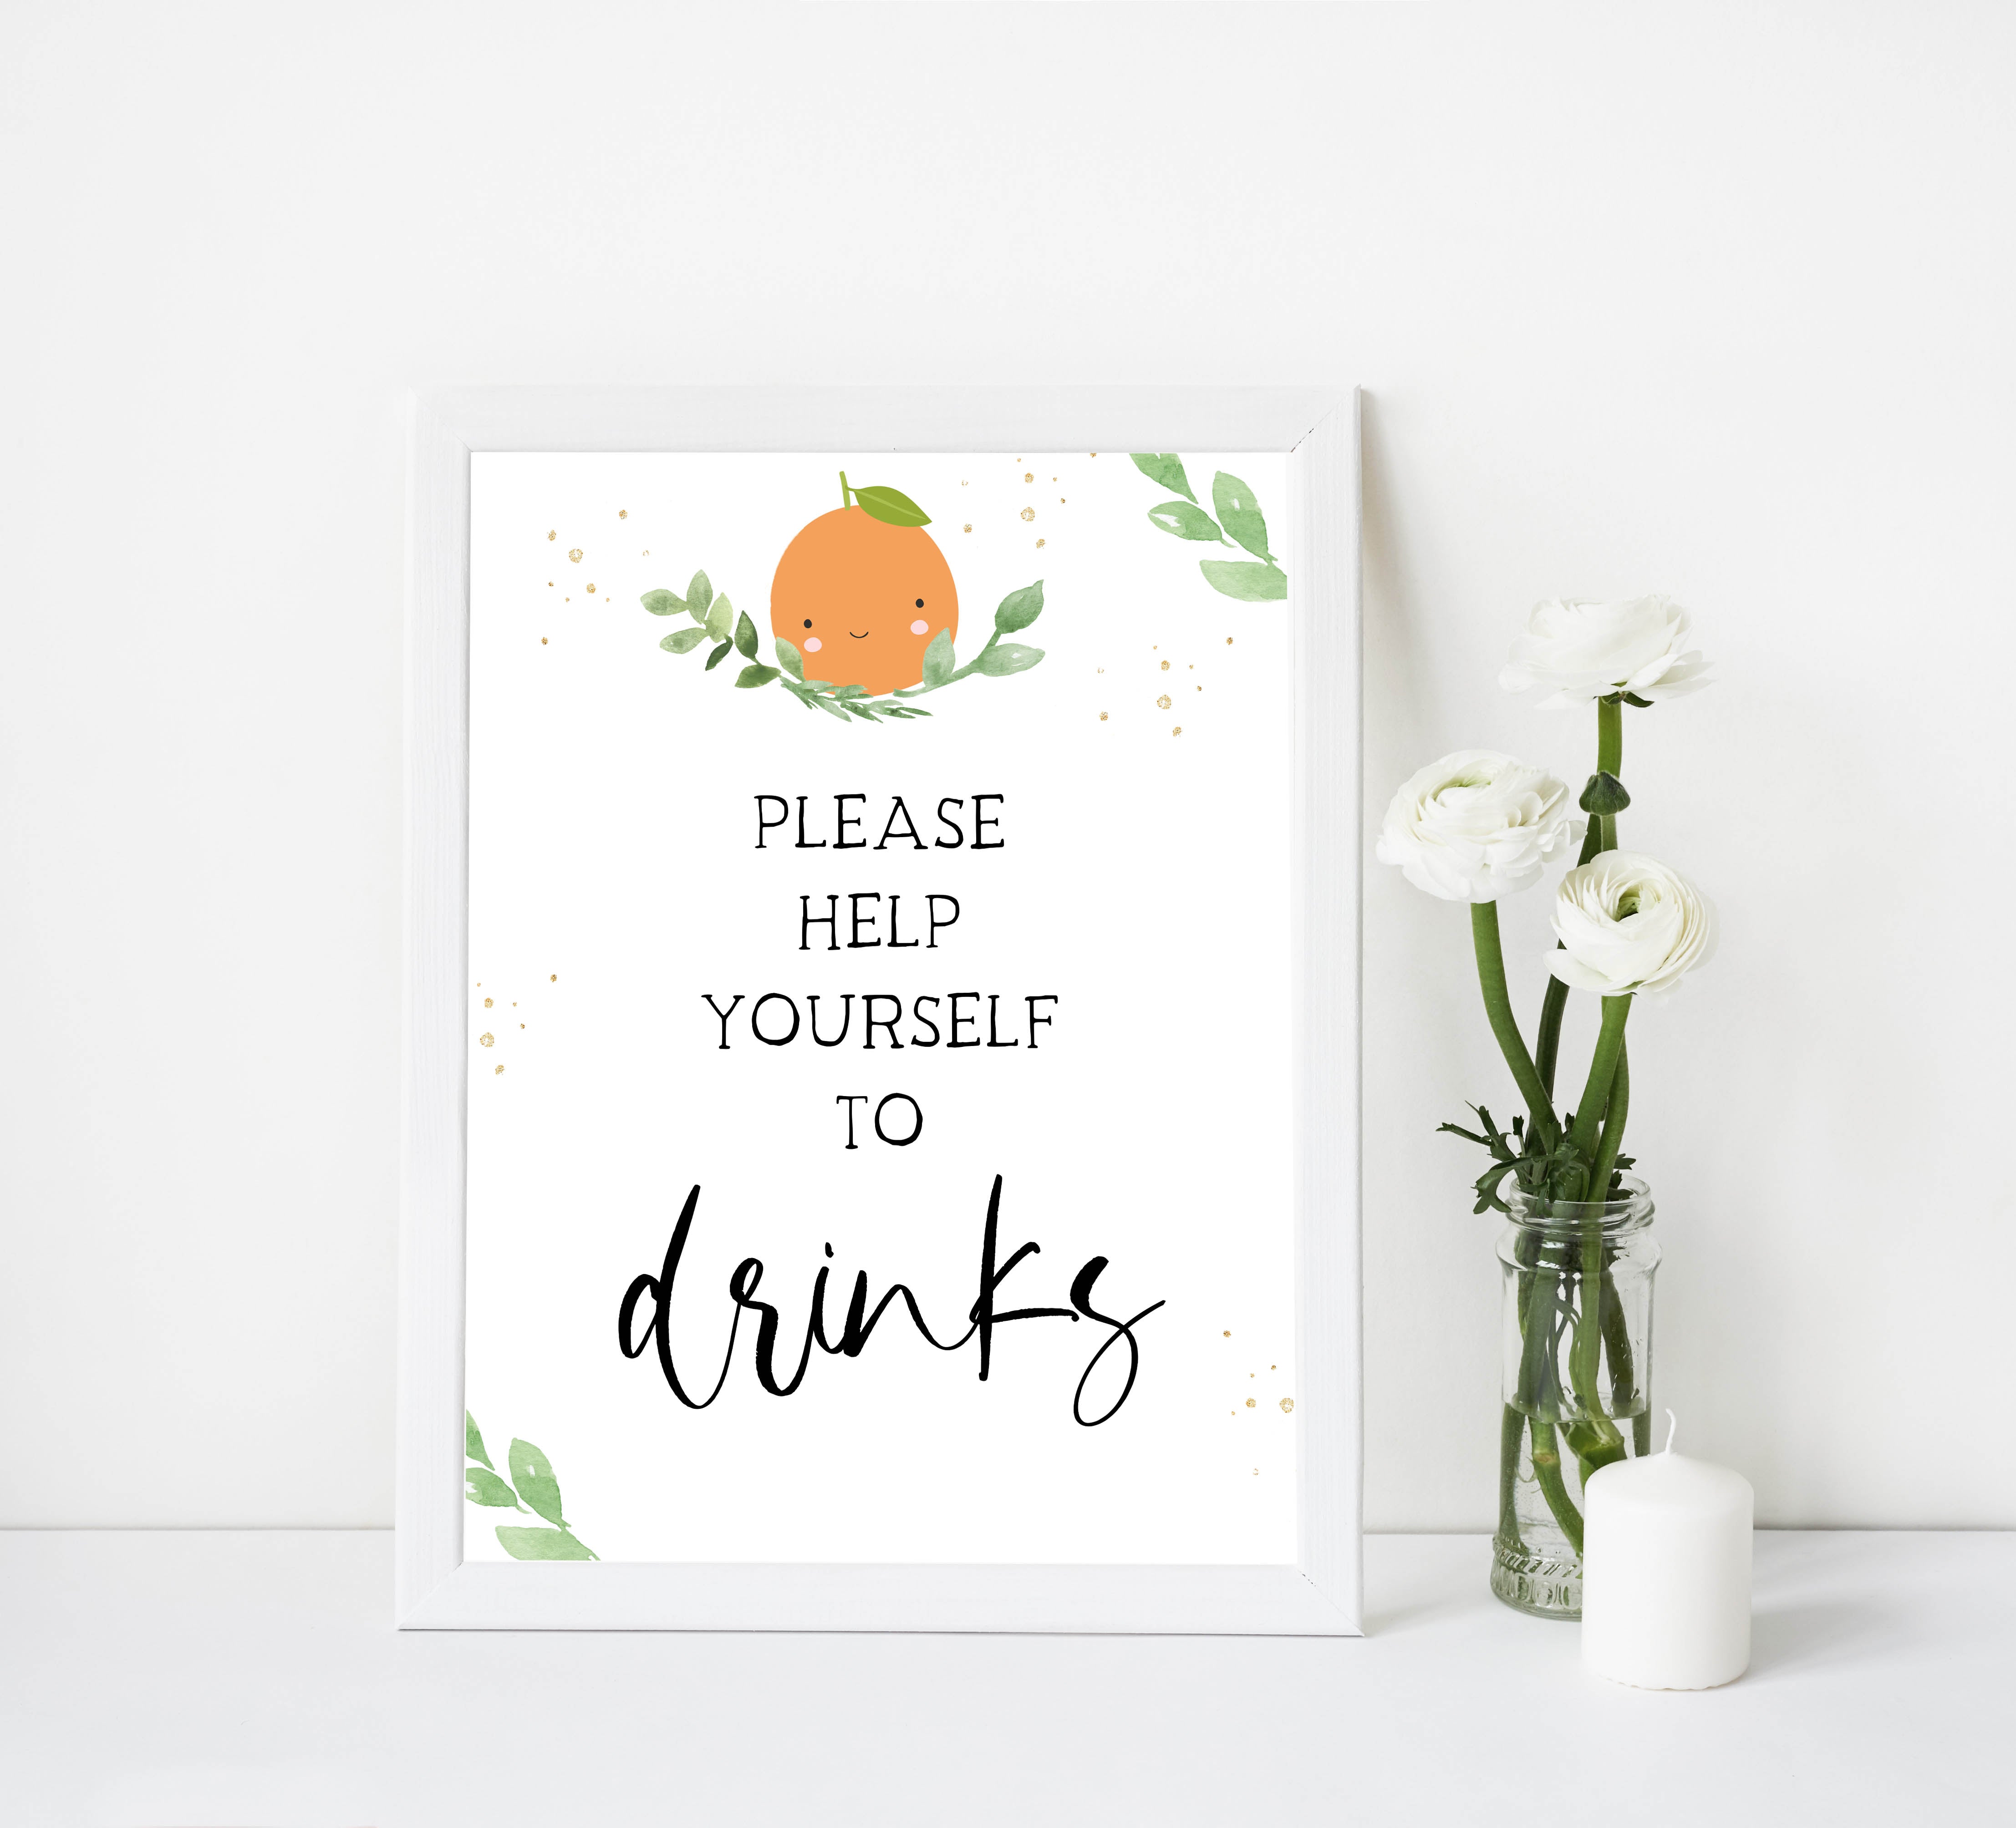 drinks baby shower table signs, Little cutie baby decor, printable baby table signs, printable baby decor, baby little cutie table signs, fun baby signs, baby little cutie fun baby table signs